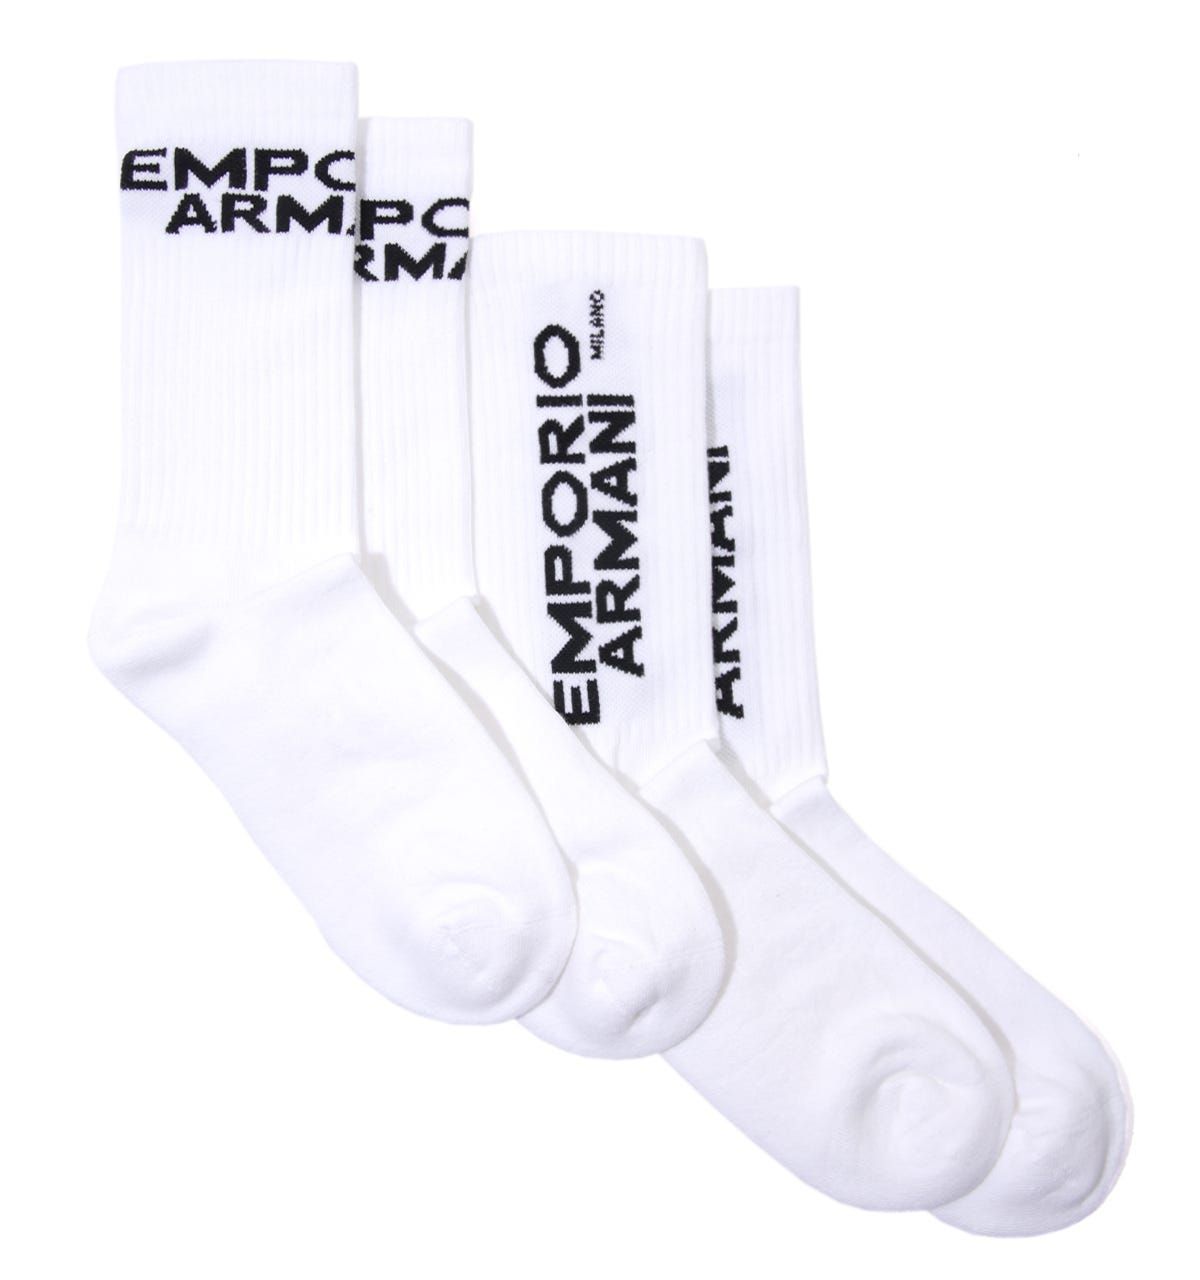 Refresh your essentials with this two pack of  EA Lettering Terrycloth socks from Emporio Armani Loungewear. Crafted from a cotton blend with added stretch for superior comfort. Featuring a quarter-calf length with ribbing for a secure fit.  Finished with signature Emporio Armani branding.Two Pack, Stretch Terrycloth Cotton Blend, Quarter-Calf Length, Made in Italy,  70% Cotton, 28% Polyamide & 2% Elastane, Emporio Armani Branding.